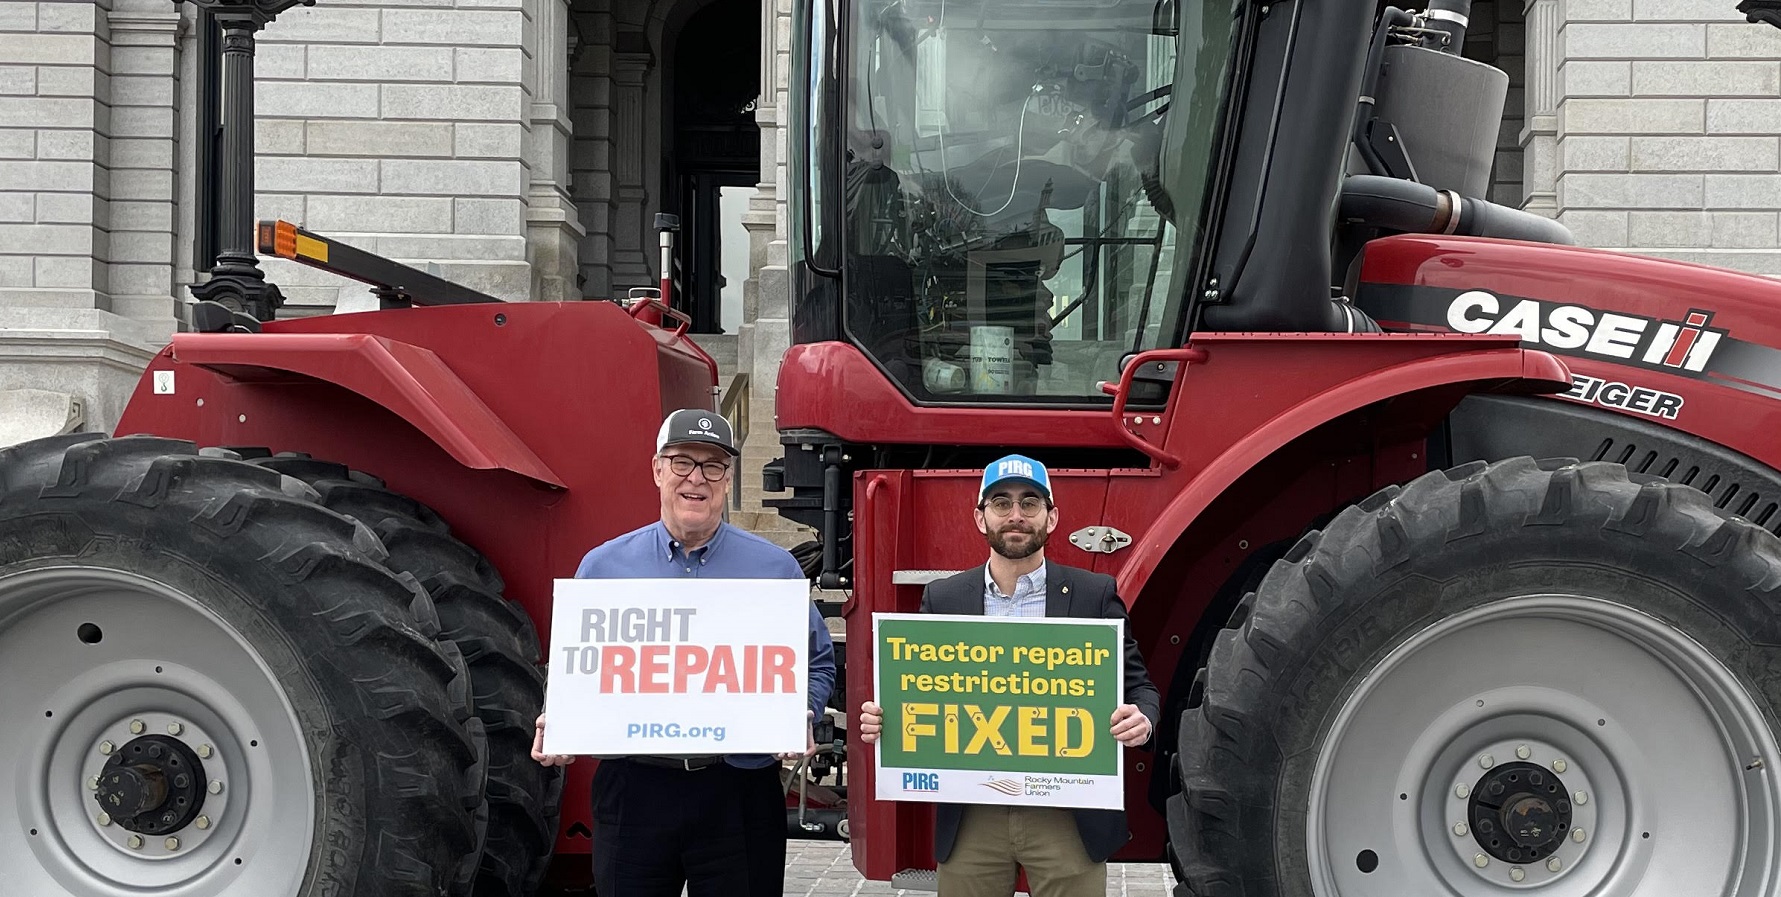 Repair.org's Willie Cade and Kevin O'Reilly from PIRG pose in front of the capitol with a tractor as part of the Right to Repair signing event.